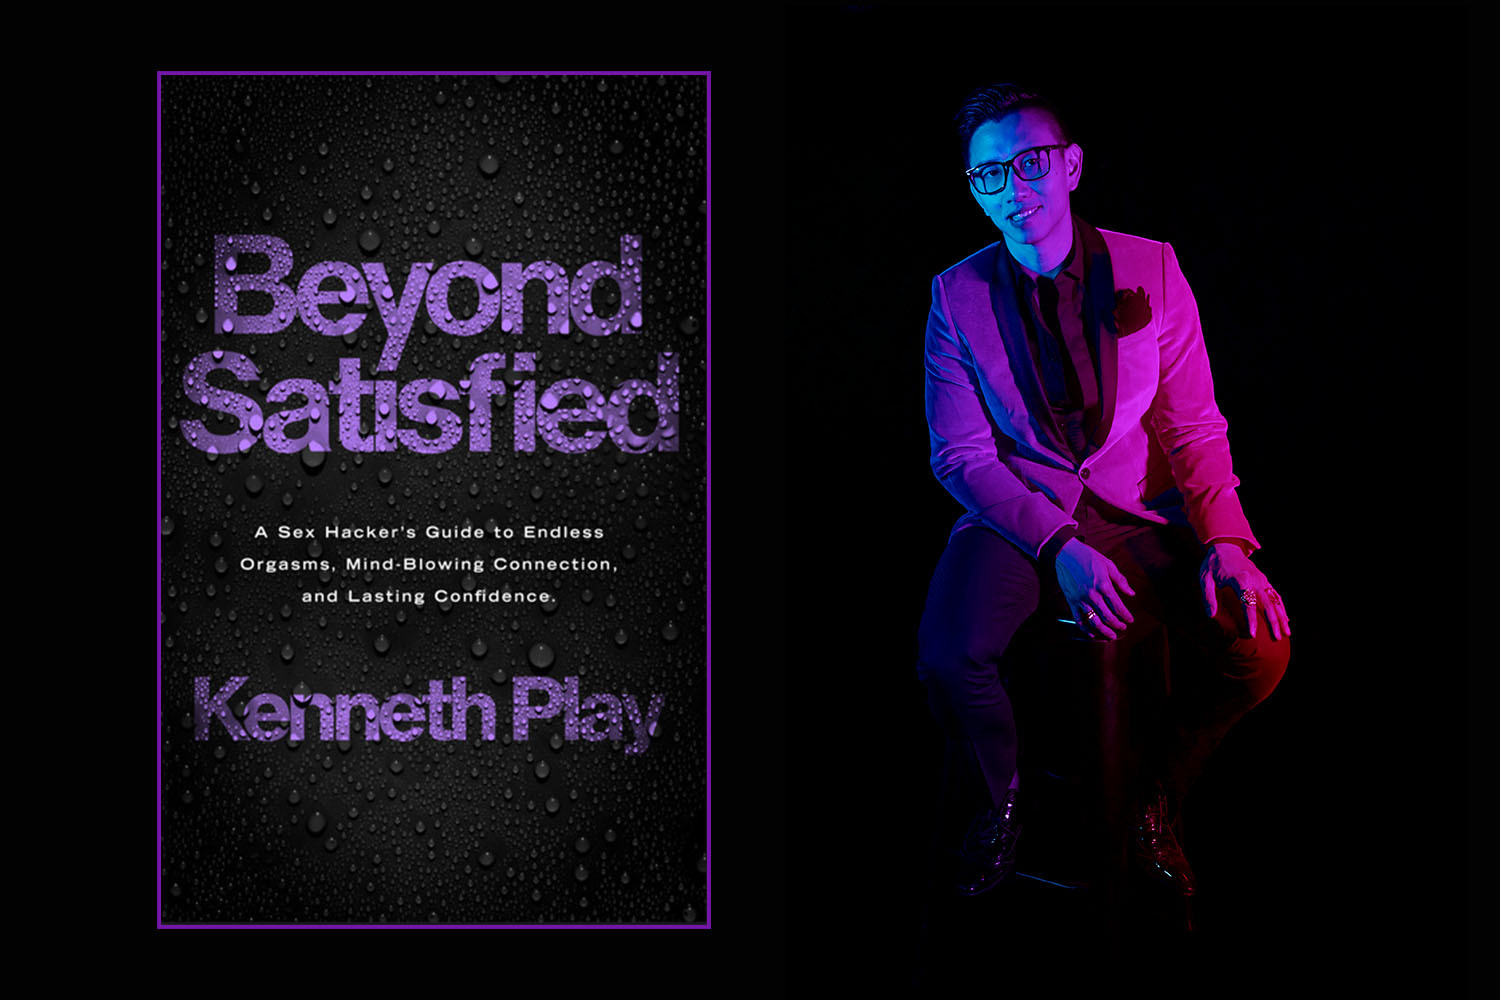 Side-by-side photos of Sex Hacker Kenneth Play and his new book, "Beyond Satisfied"